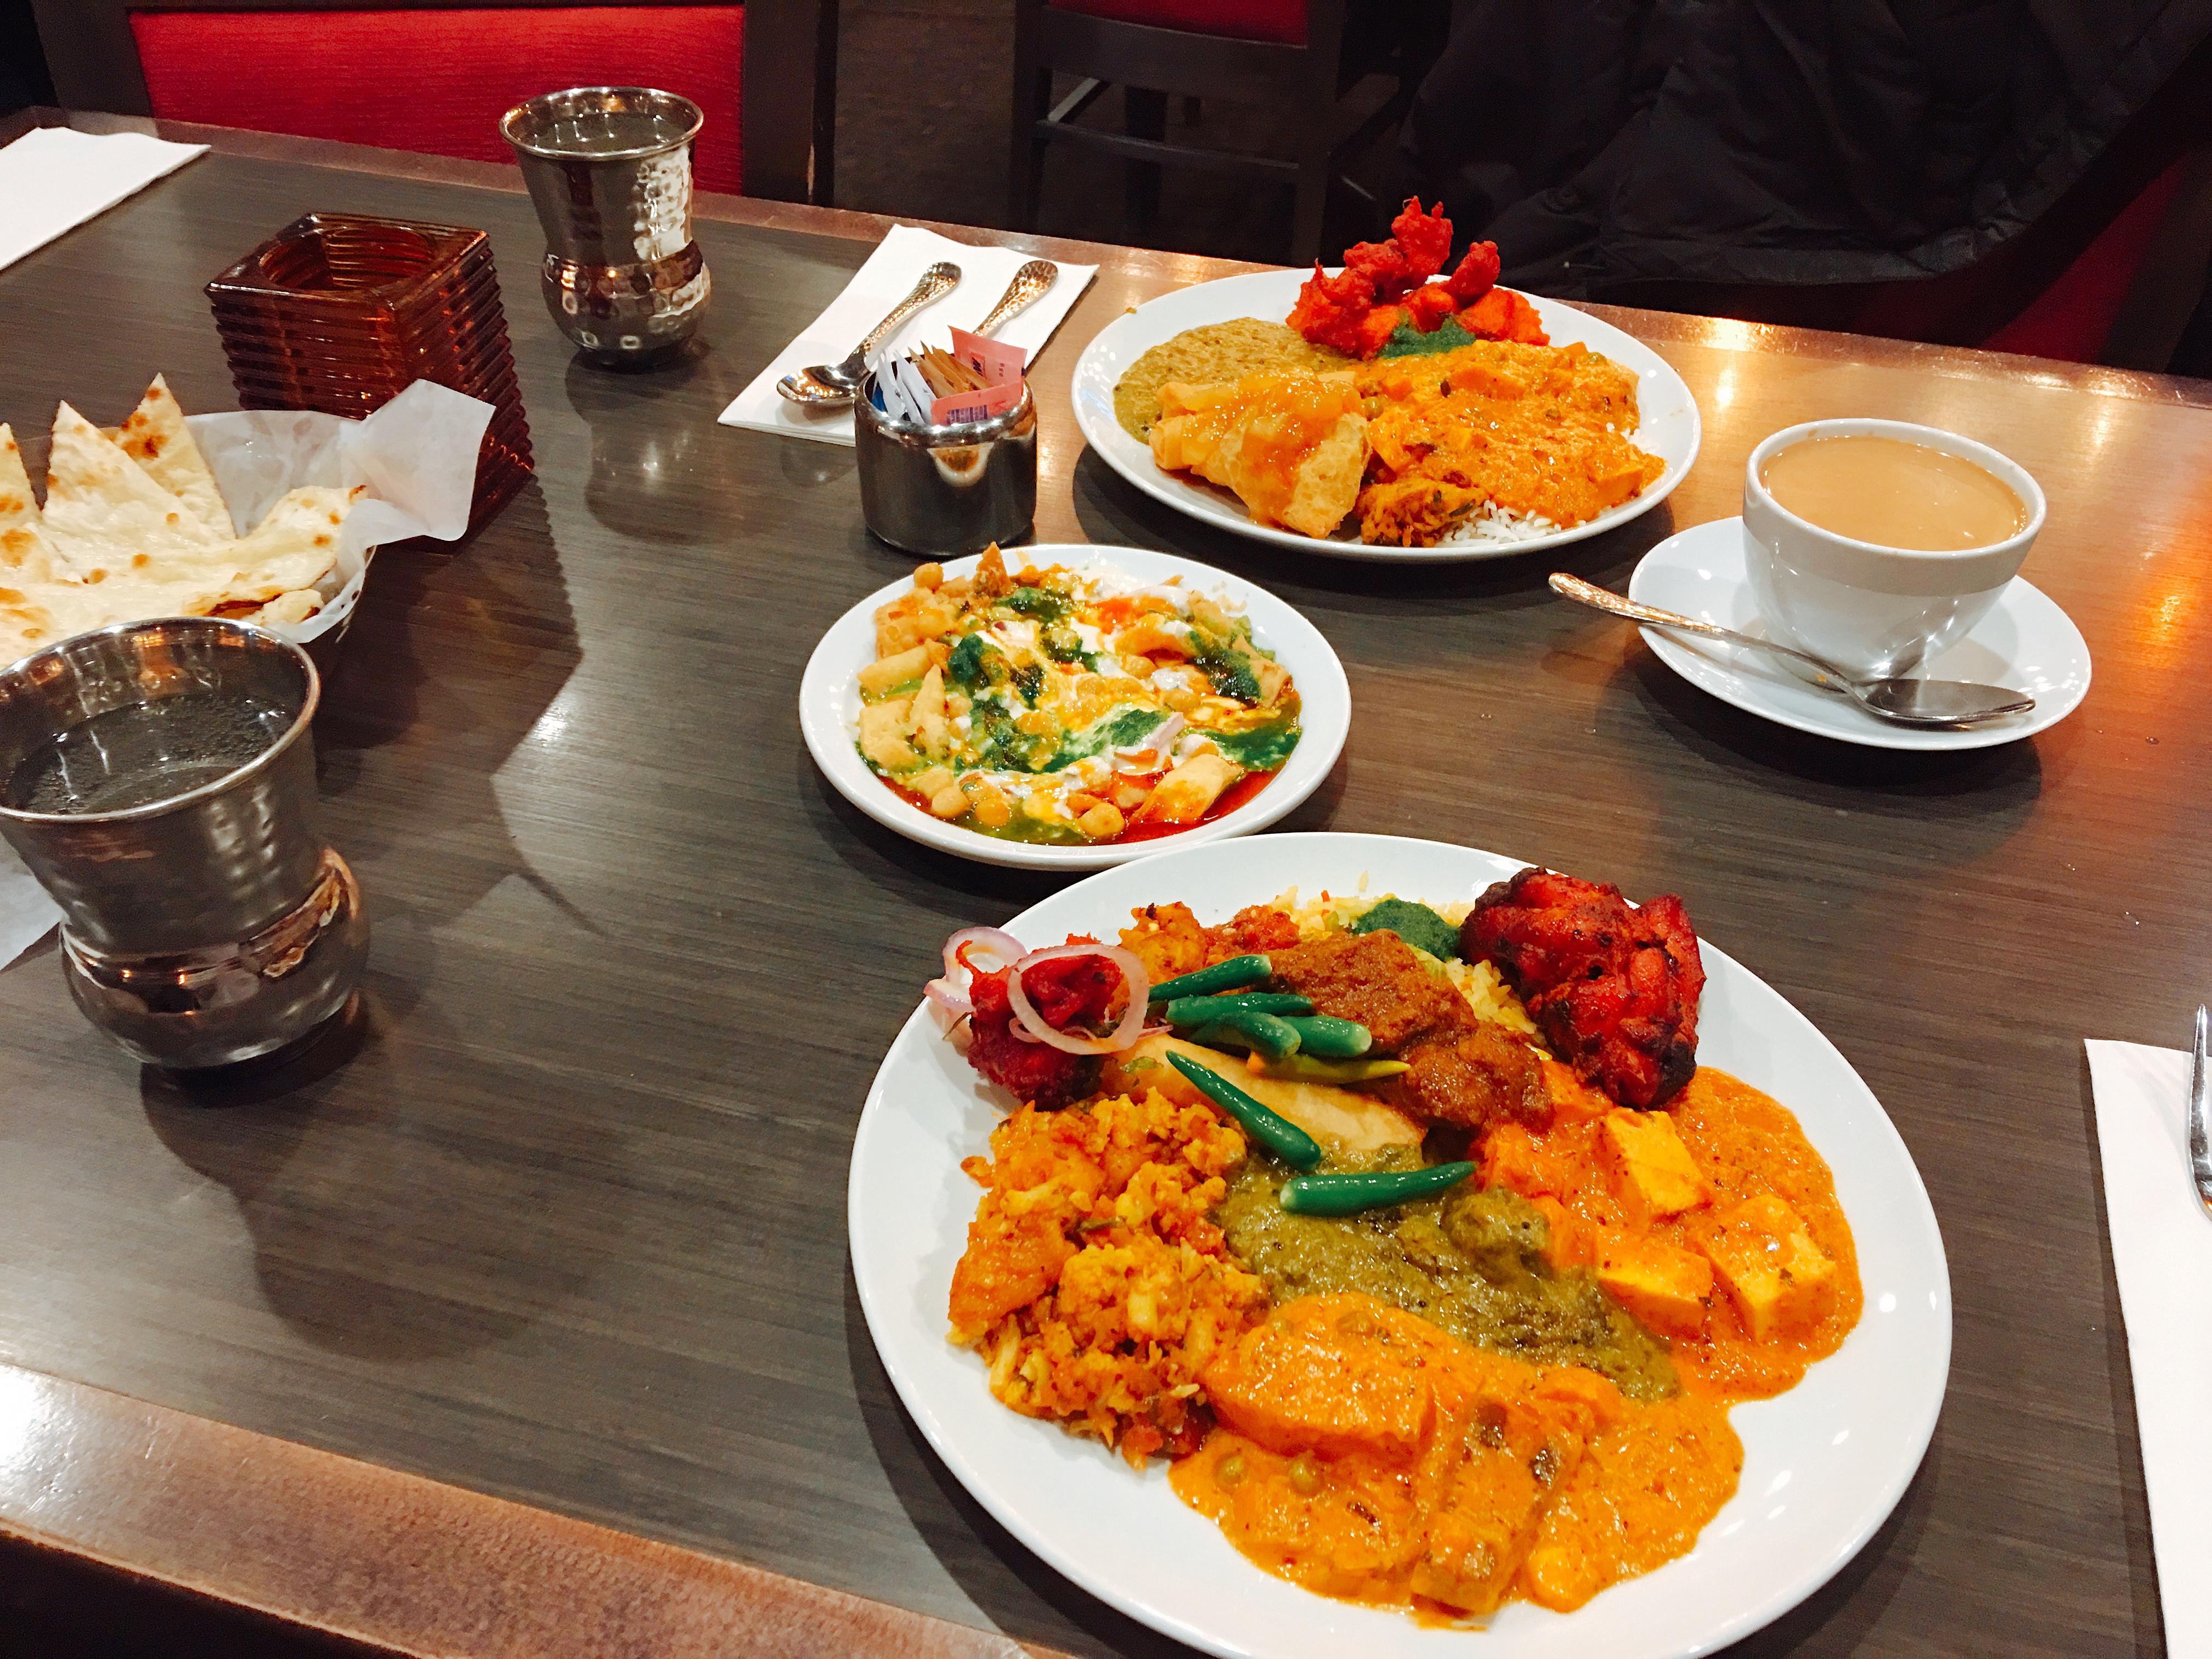 Little India Restaurant, Voted Best Indian, Buffet, Dine-in, Takeout, Delivery, Vegetarian and Indian Sweets